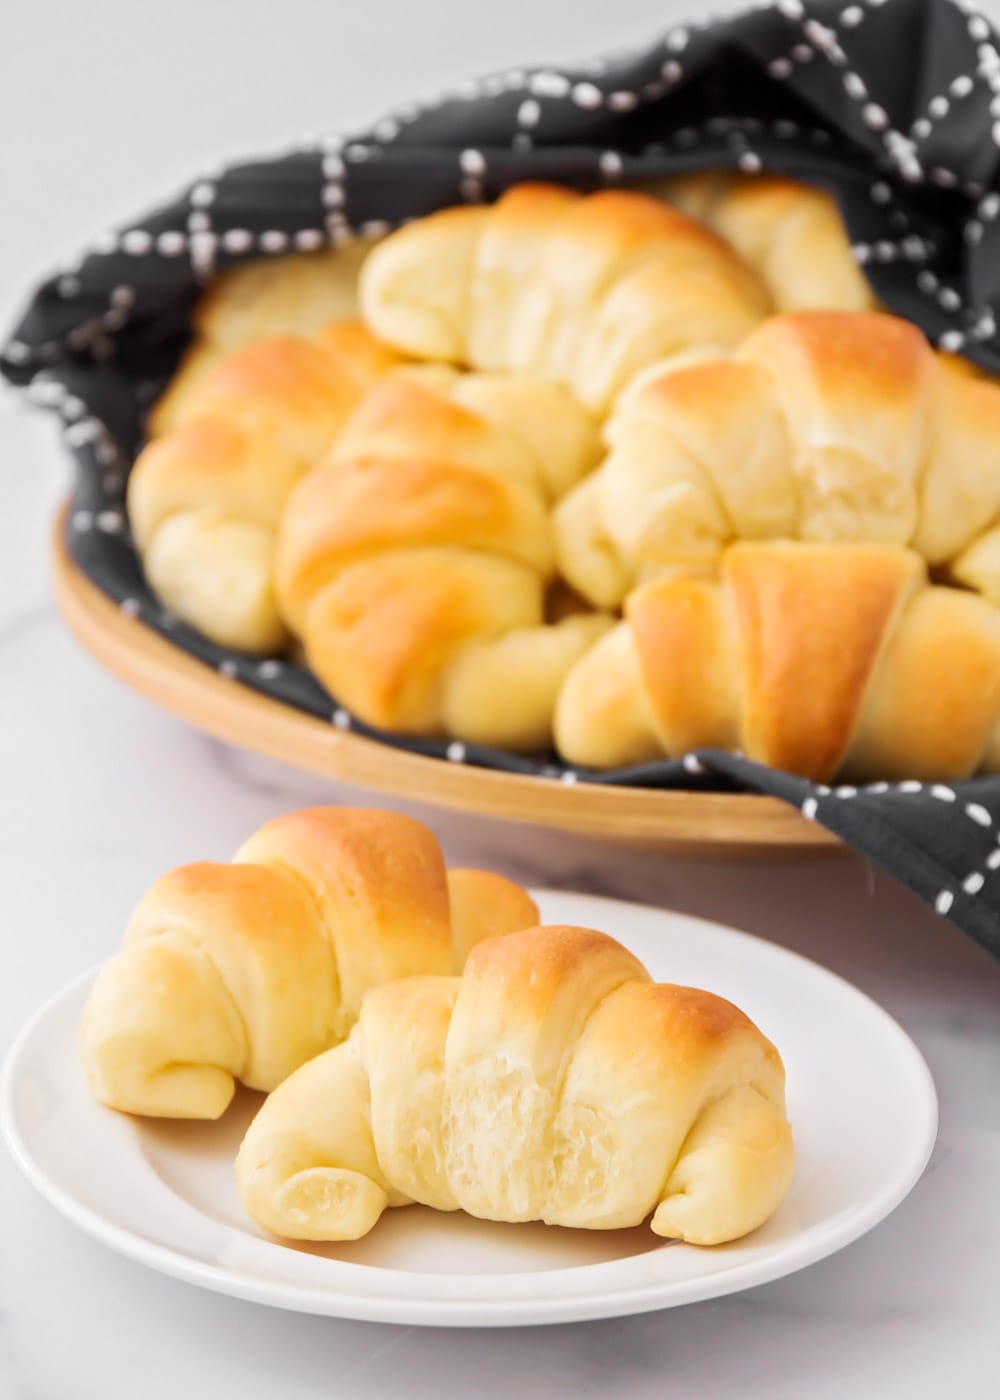 Homemade Crescent Rolls - Immaculate Bites